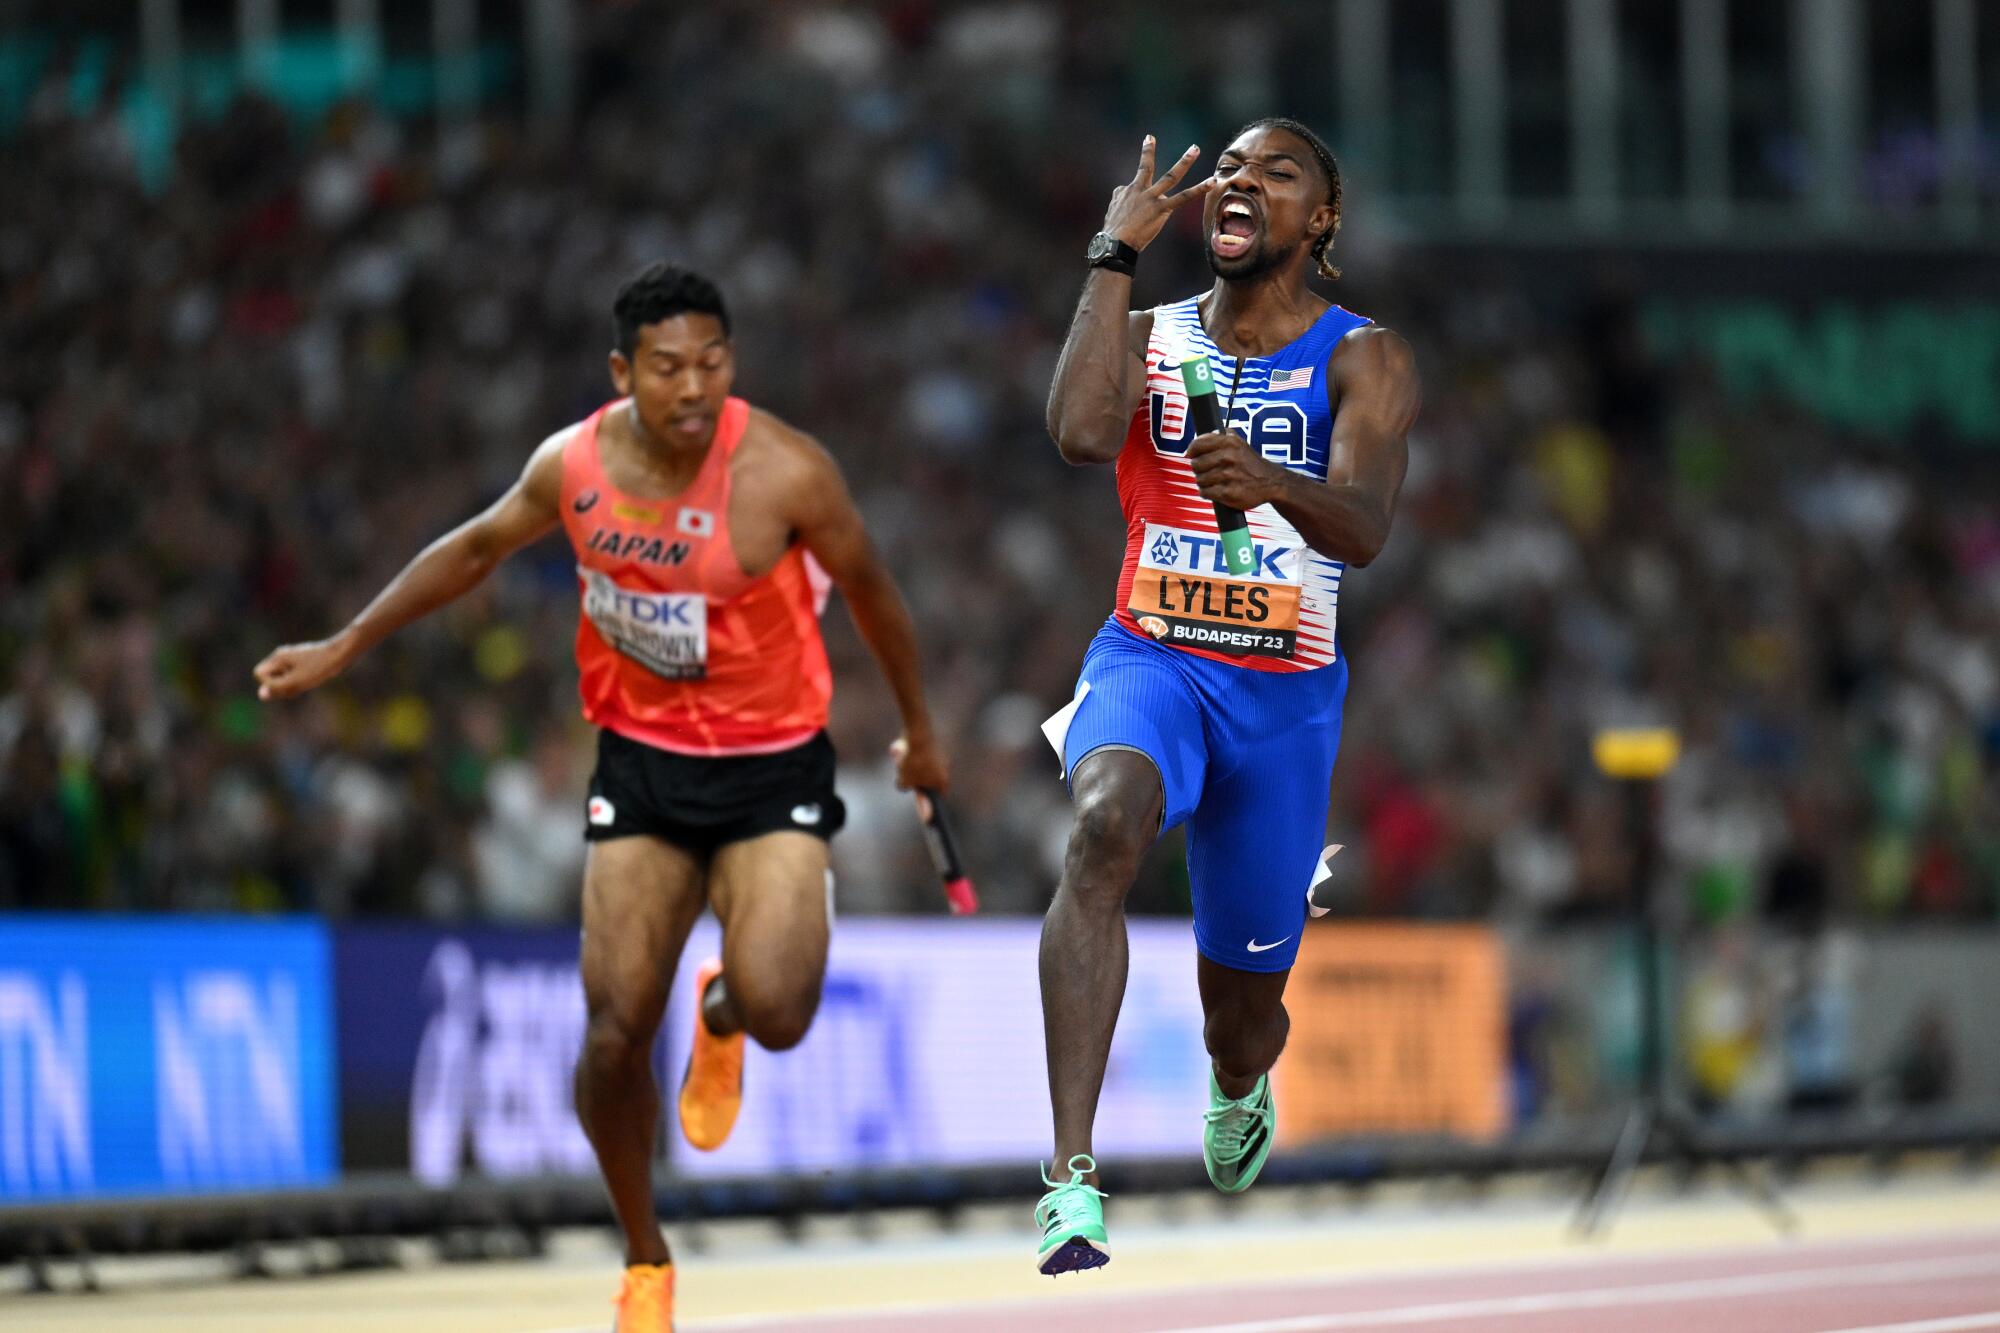 Noah Lyles celebrates after anchoring the men's 4X100-meter relay team in its victory at the World Athletics Championships.